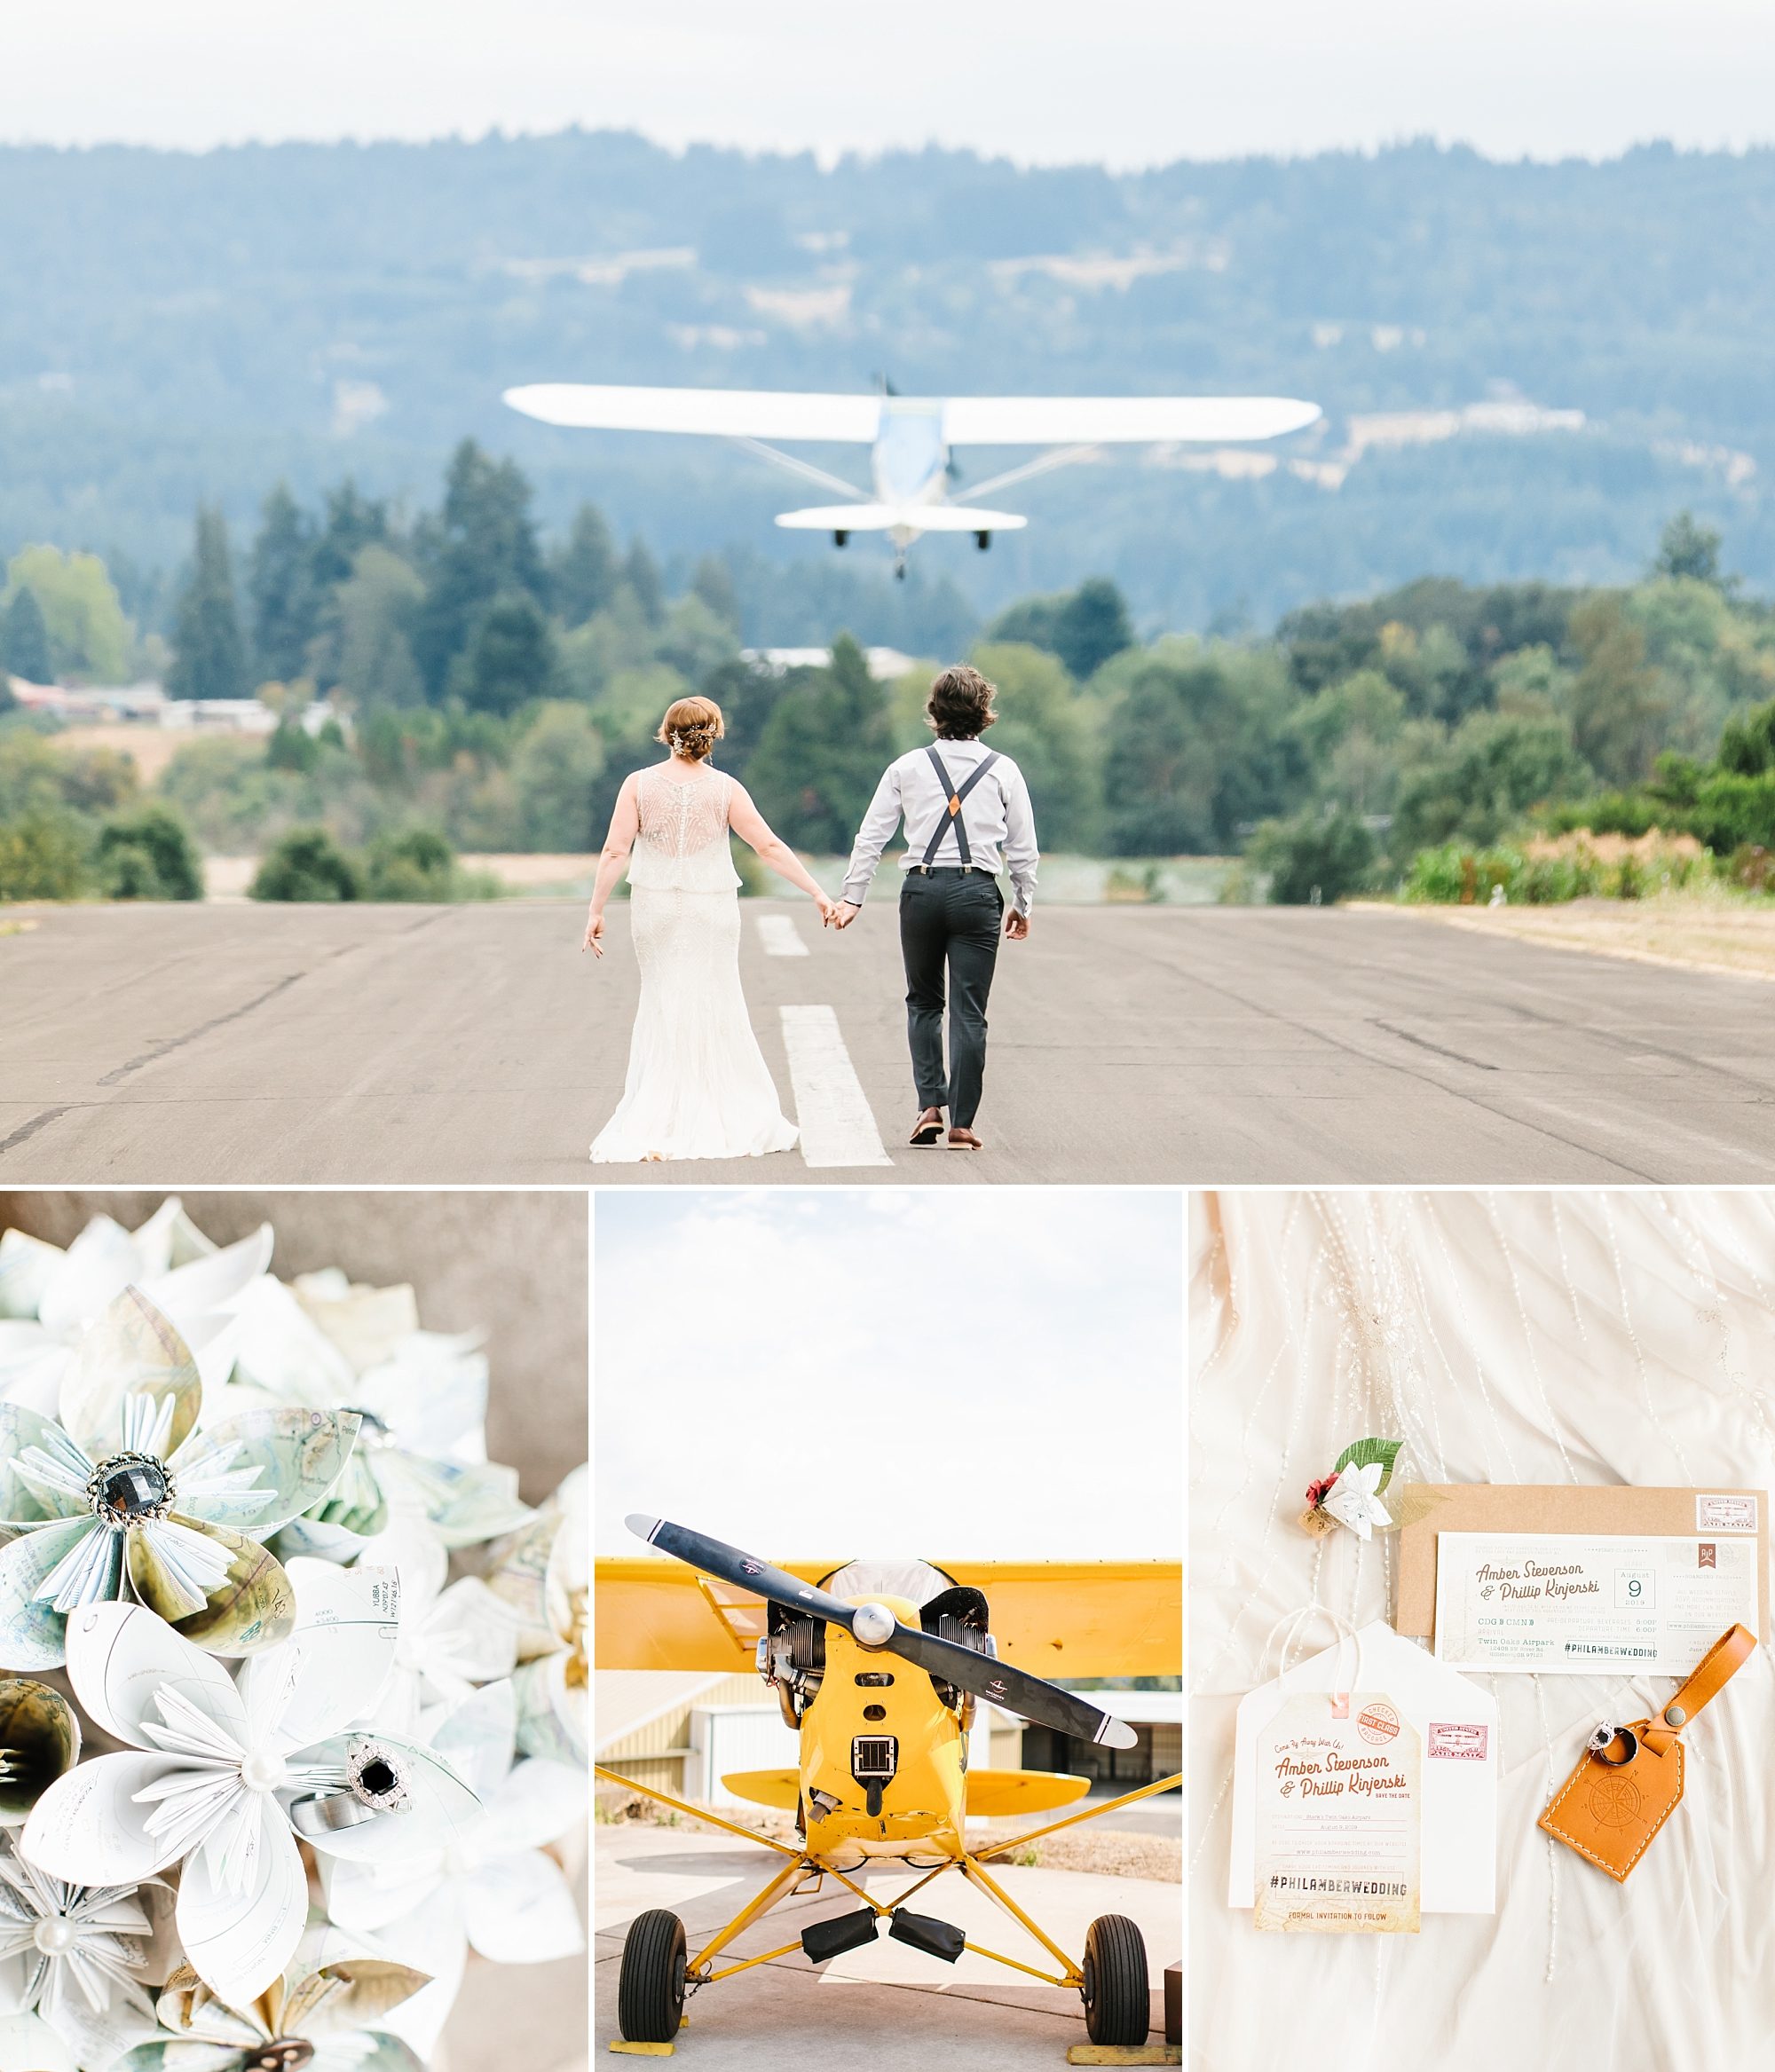 Beautiful Oregon wedding in an airplane hangar focused on a classic, timeless feel with accents of travel and aviation. Wedding Photographer Rachel Lindsey